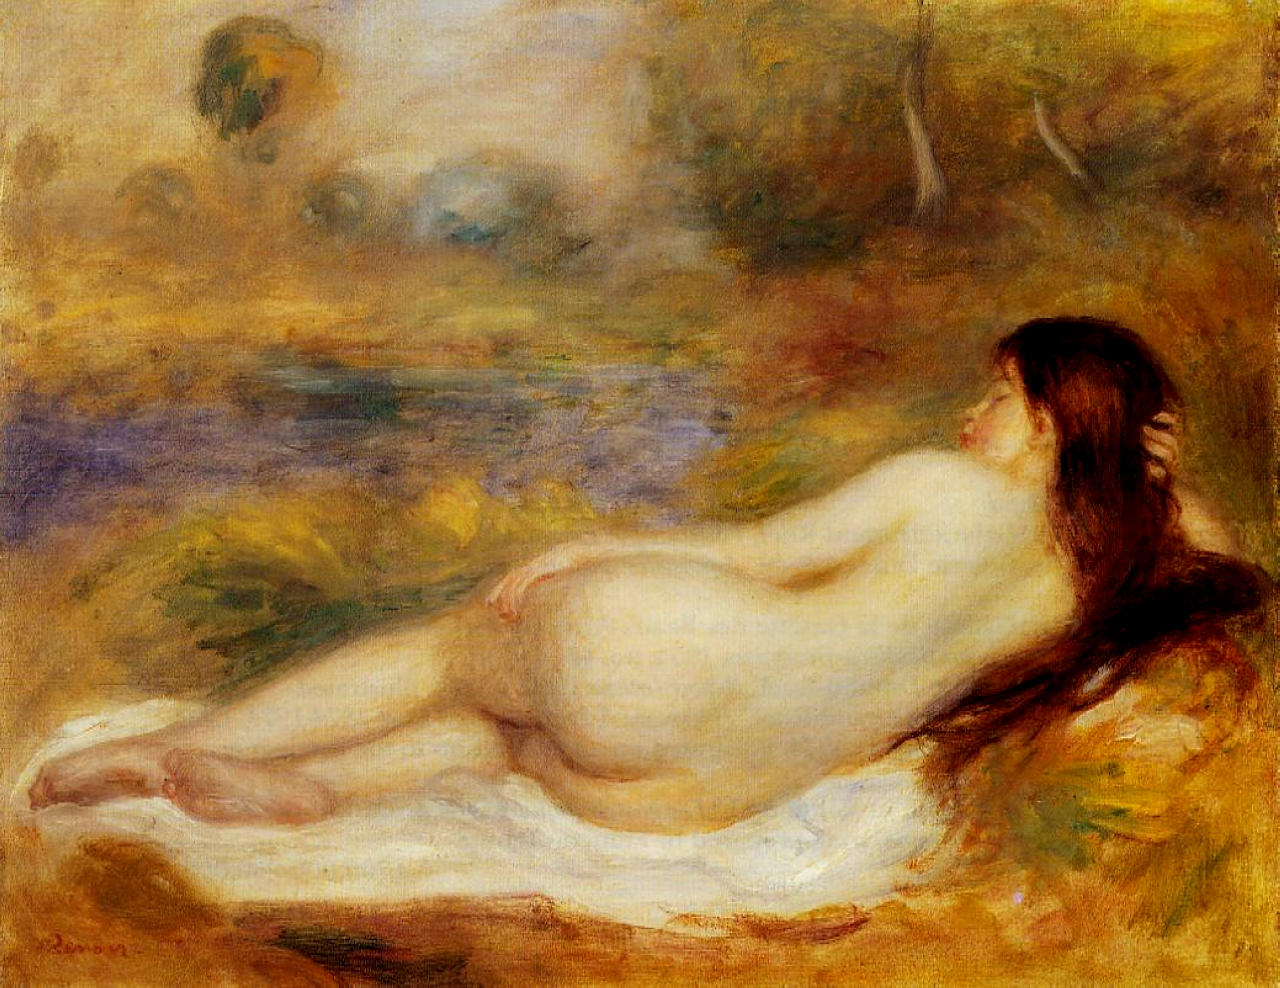 Nude Reclining on the Grass - Pierre-Auguste Renoir painting on canvas